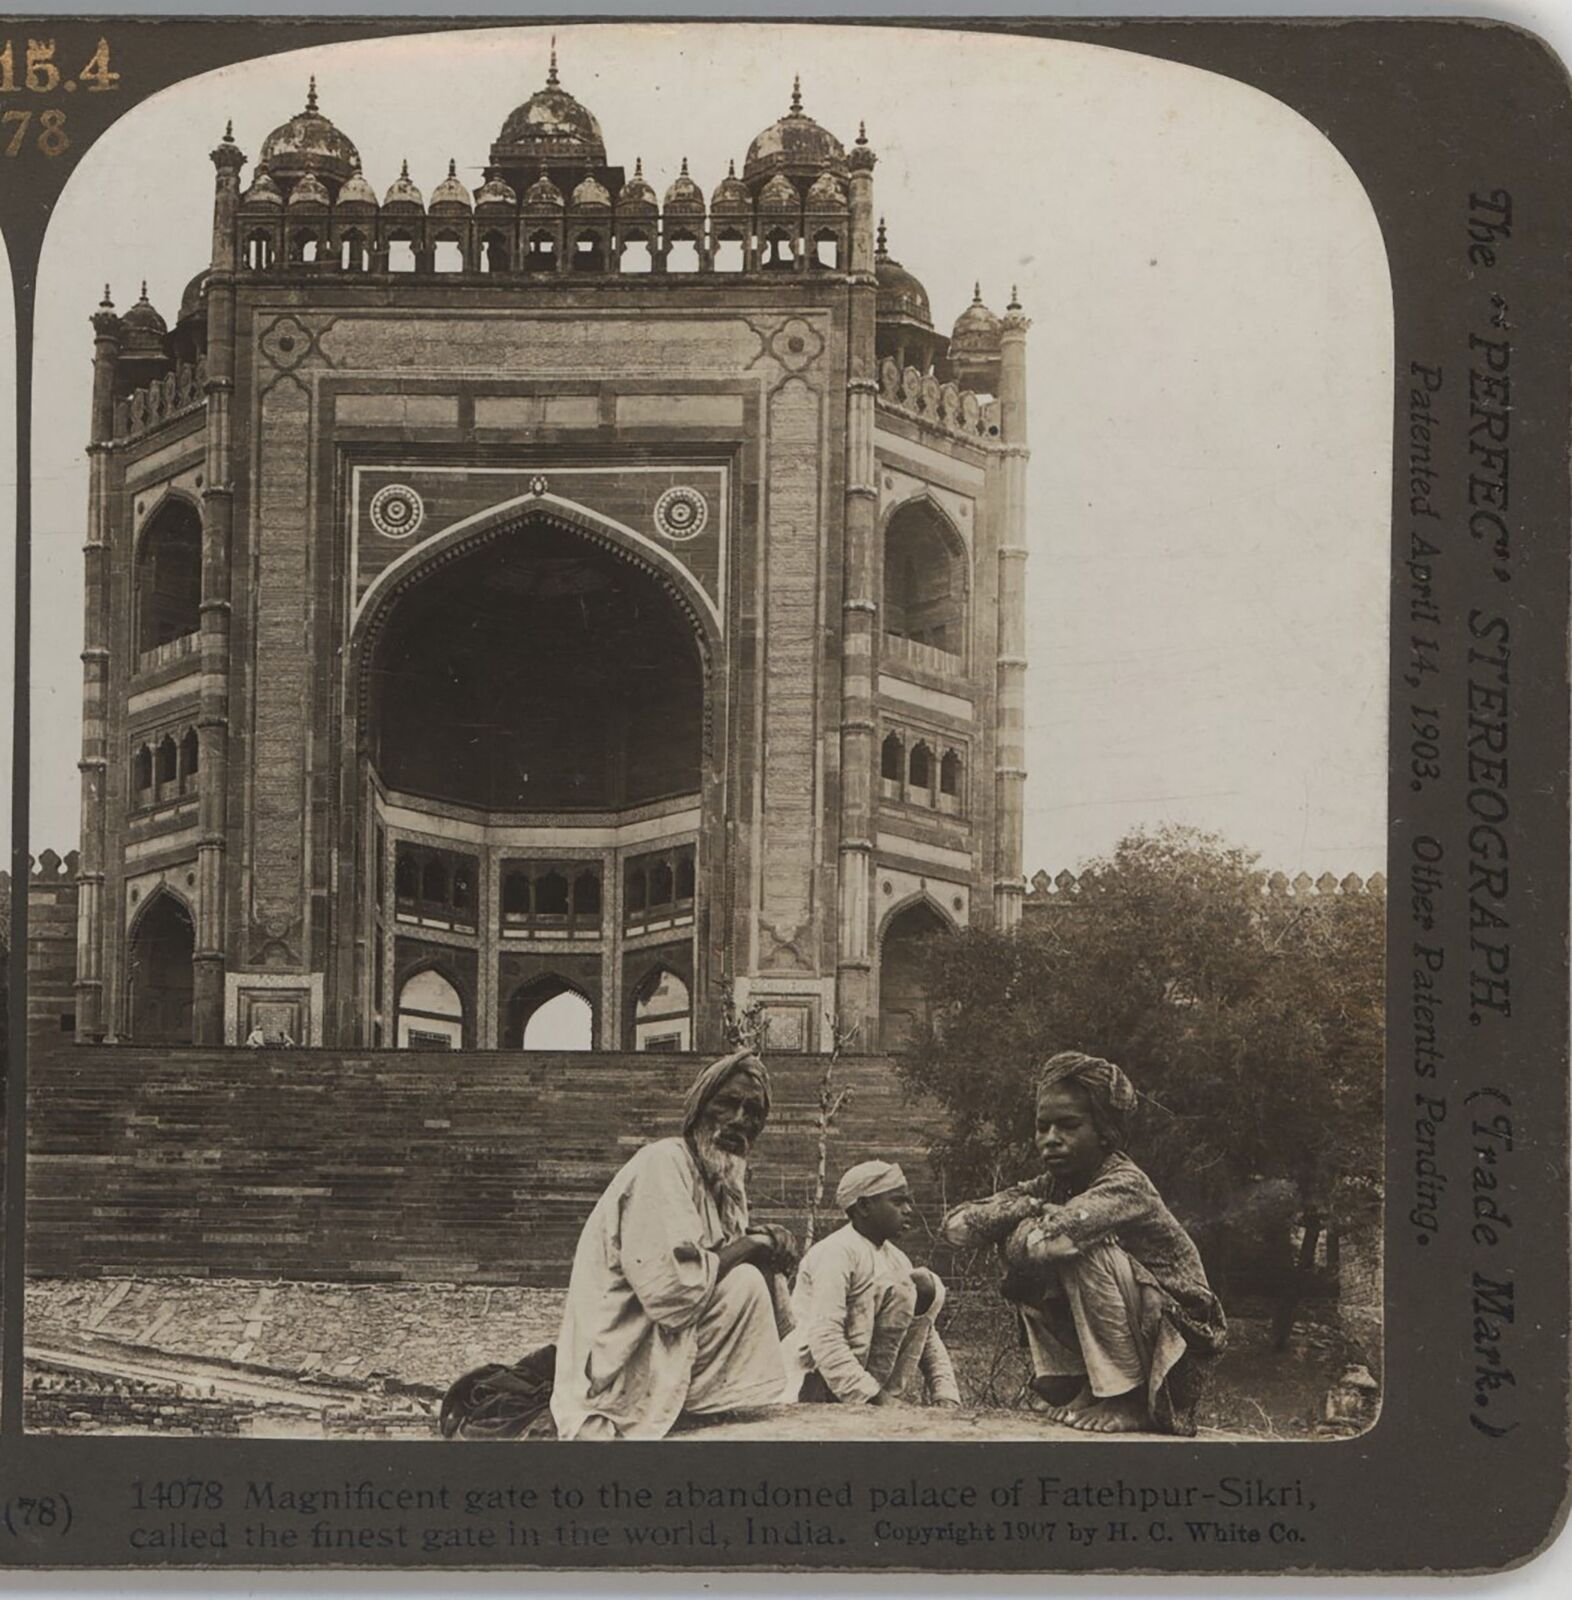 Magnificent Gate Abandoned Palace Fatehpur-Sikri India HC White Stereoview 1907